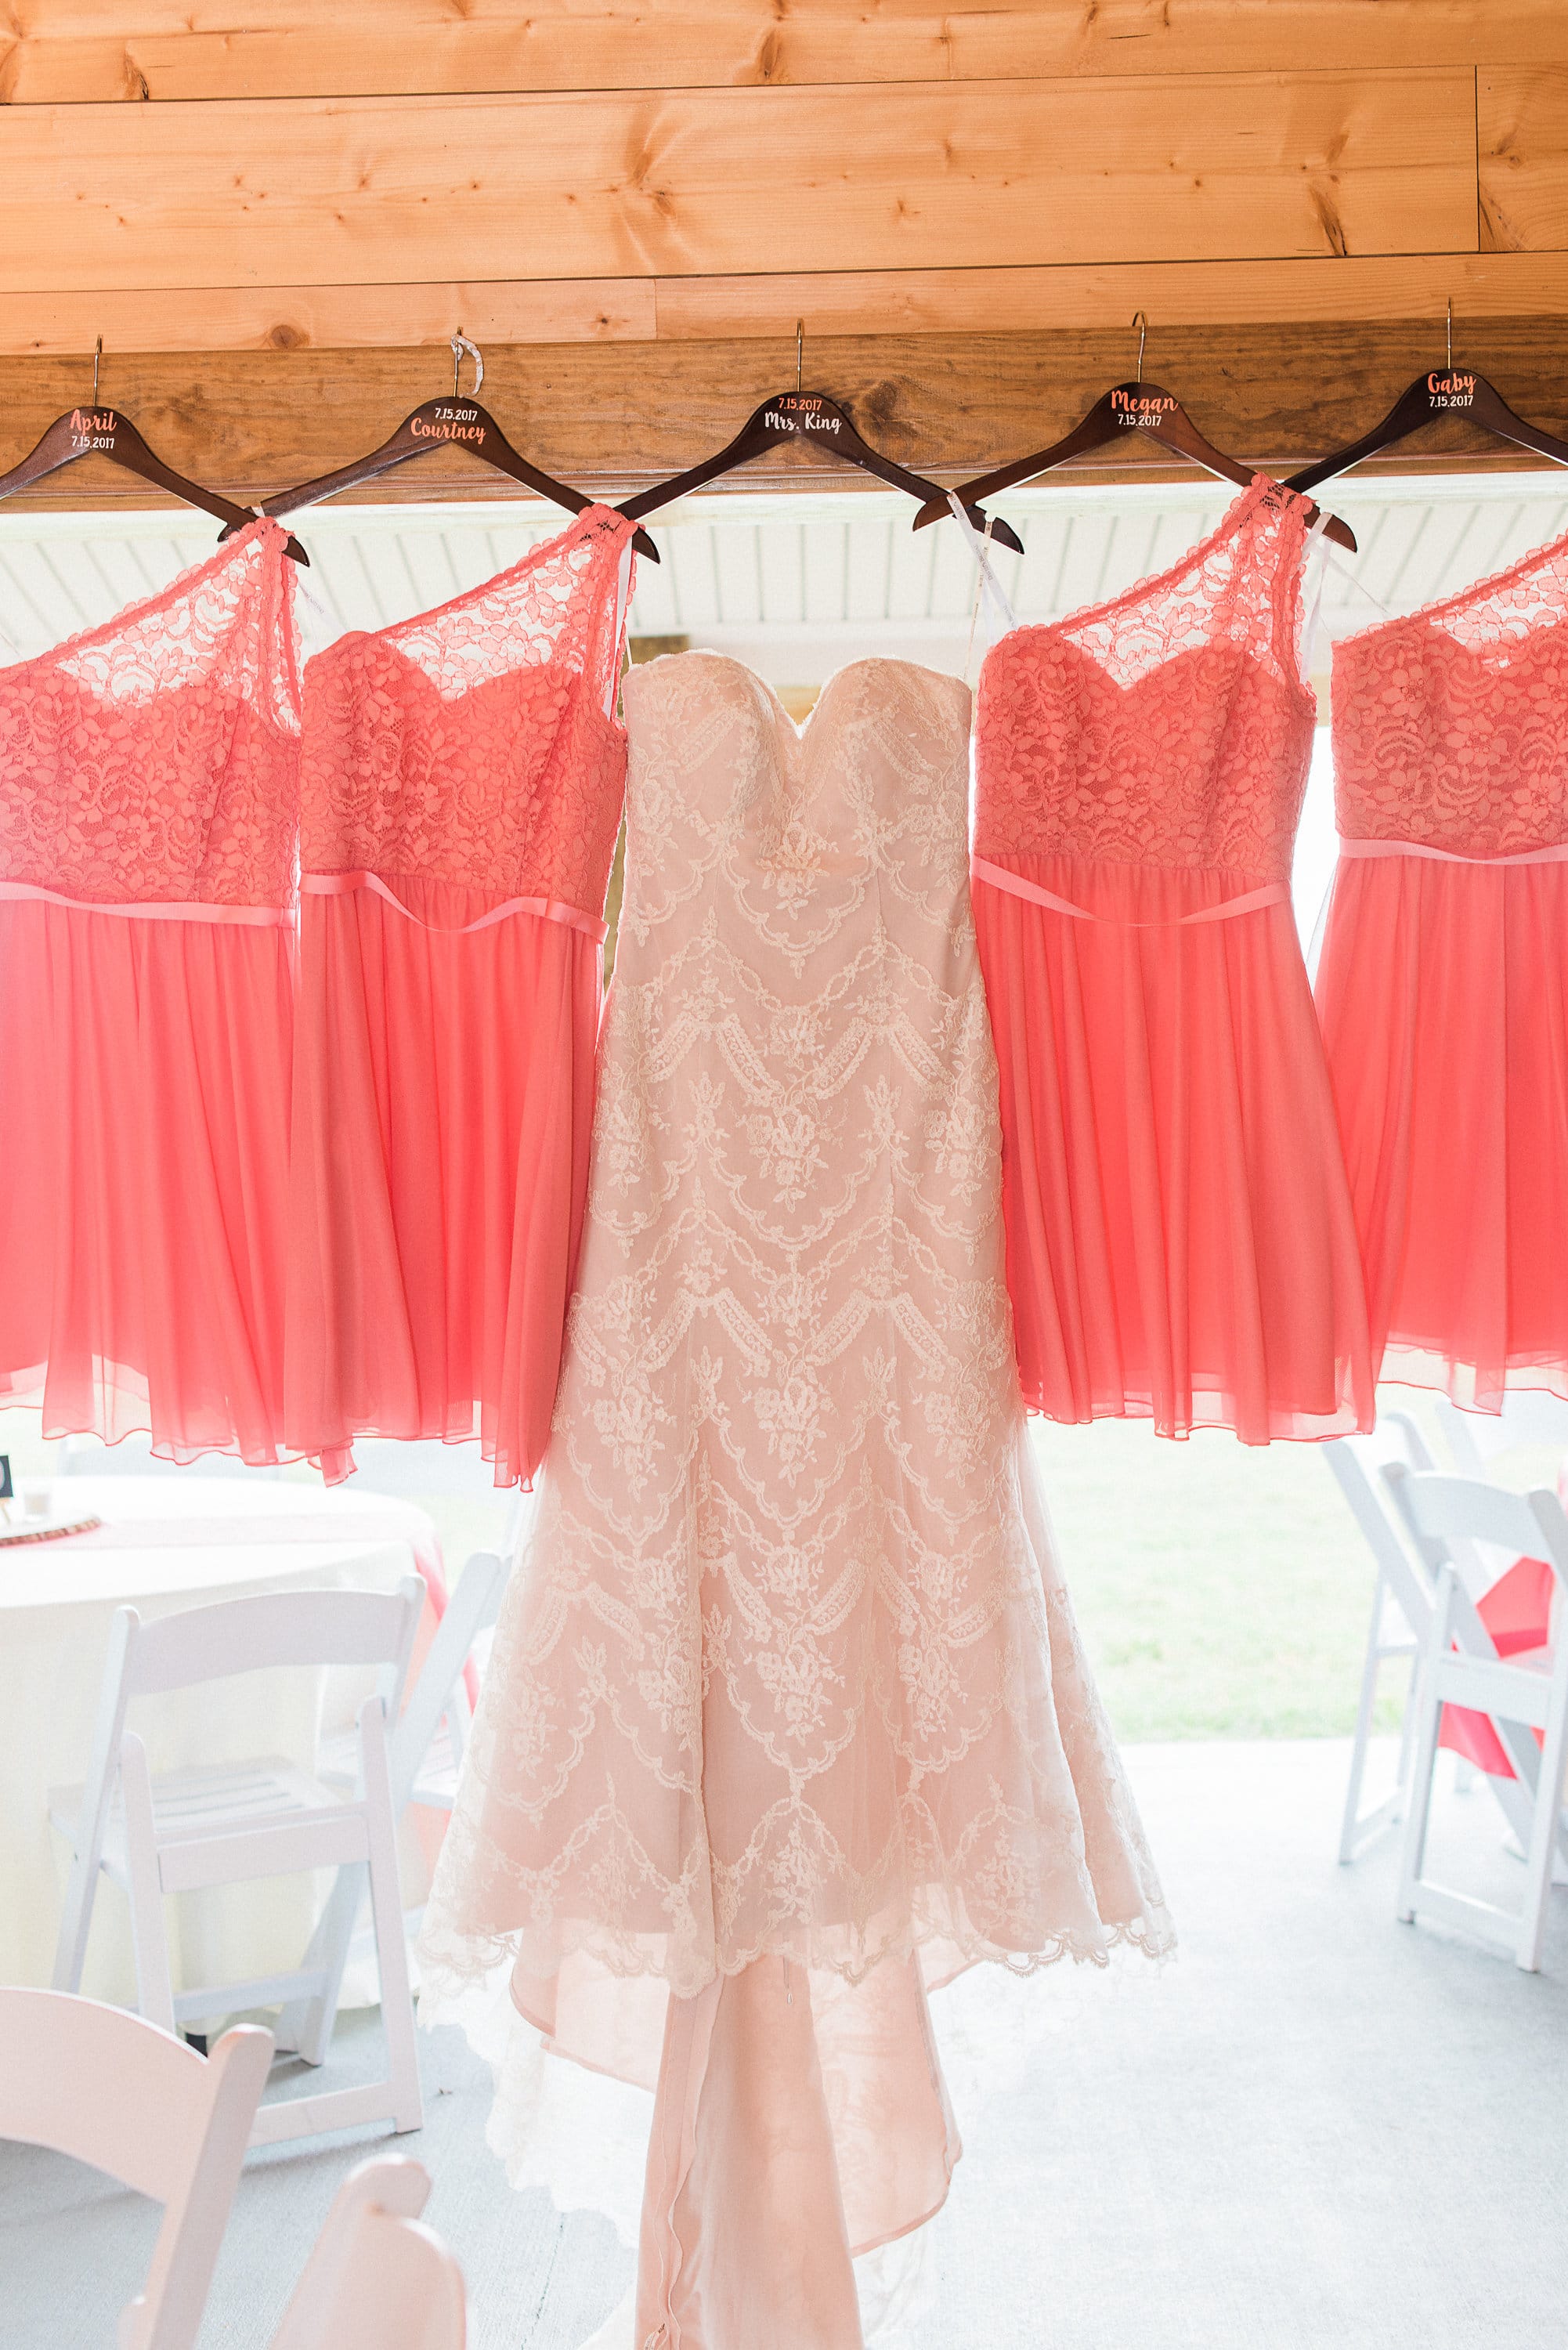 Blush Lace Wedding Dress in Classic + Colorful Nuptials. Kirstie blush wedding dress by Maggie Sottero.